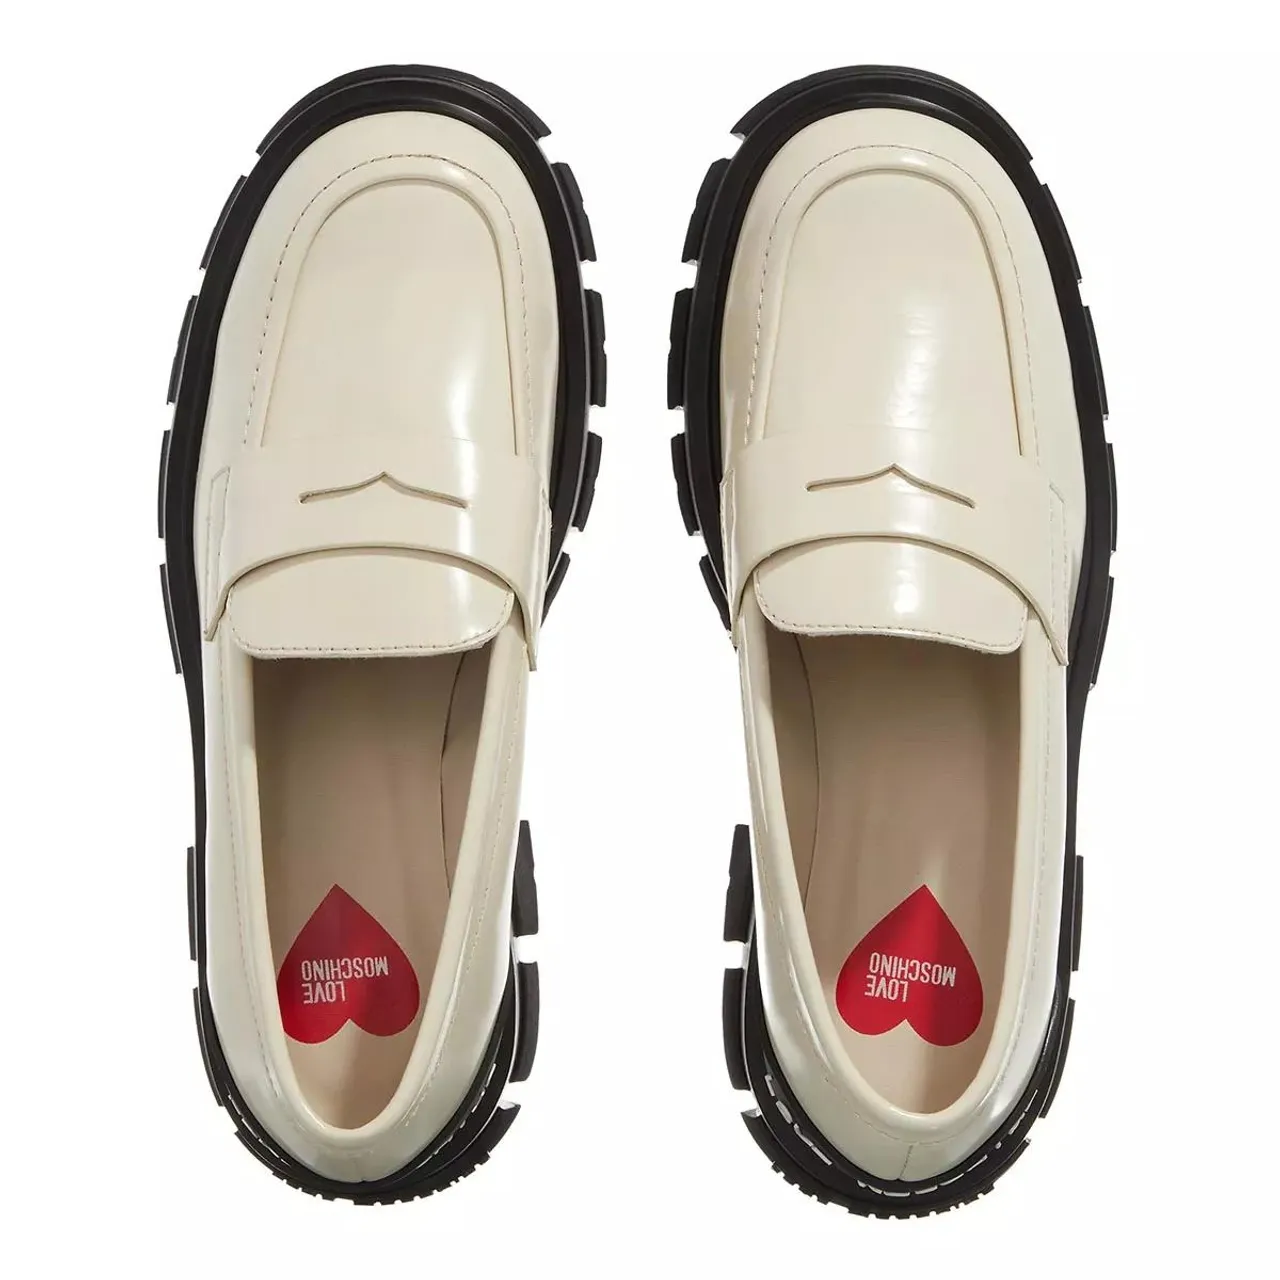 Love Moschino Loafers & Ballet Pumps - Winter Tassel - creme - Loafers & Ballet Pumps for ladies